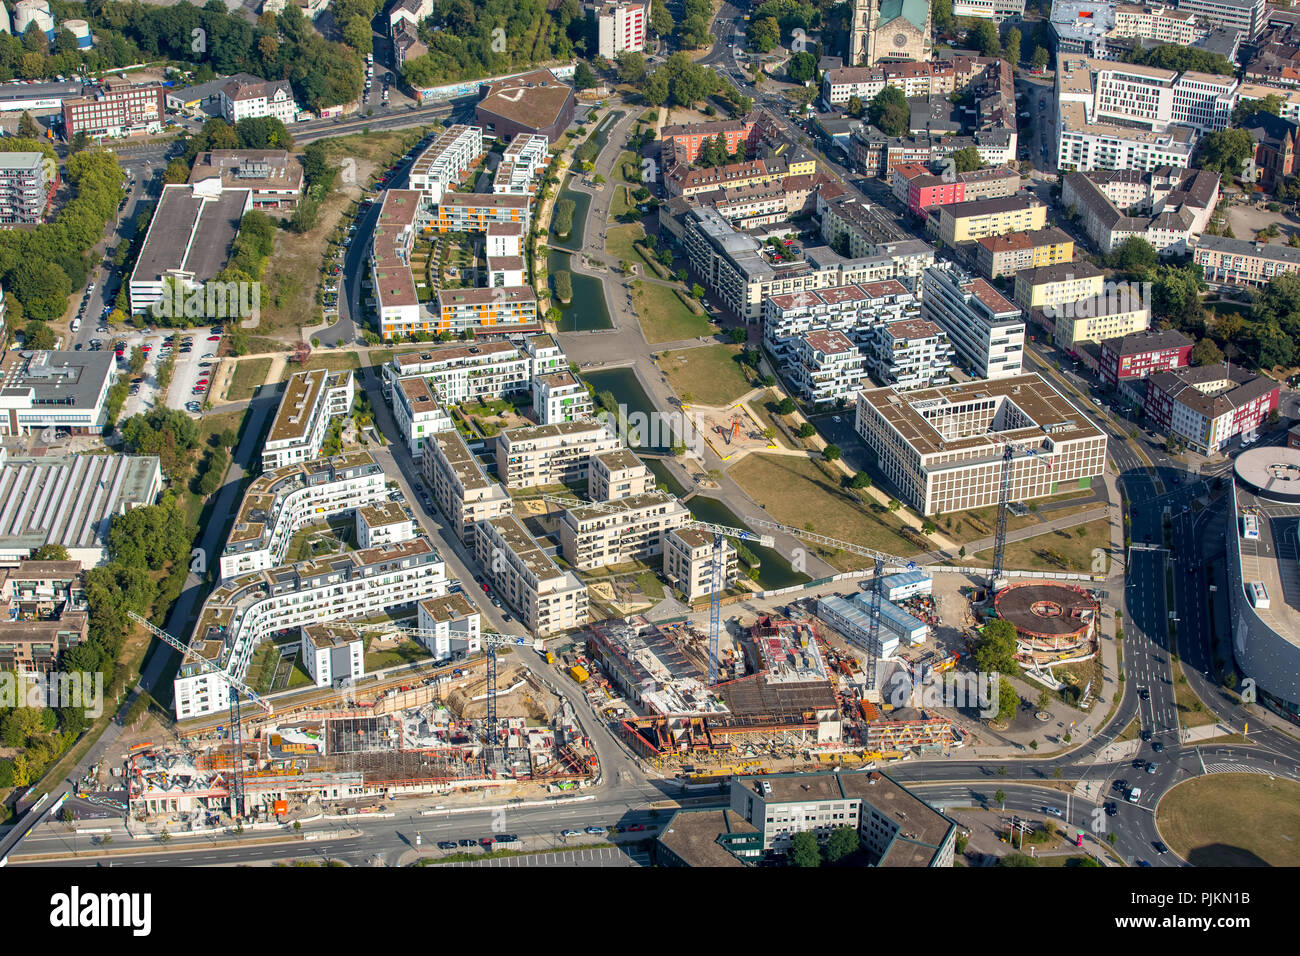 Aerial view, construction works at Funke Medien Campus in the green center Essen, Essen, Ruhr area, North Rhine-Westphalia, Germany Stock Photo